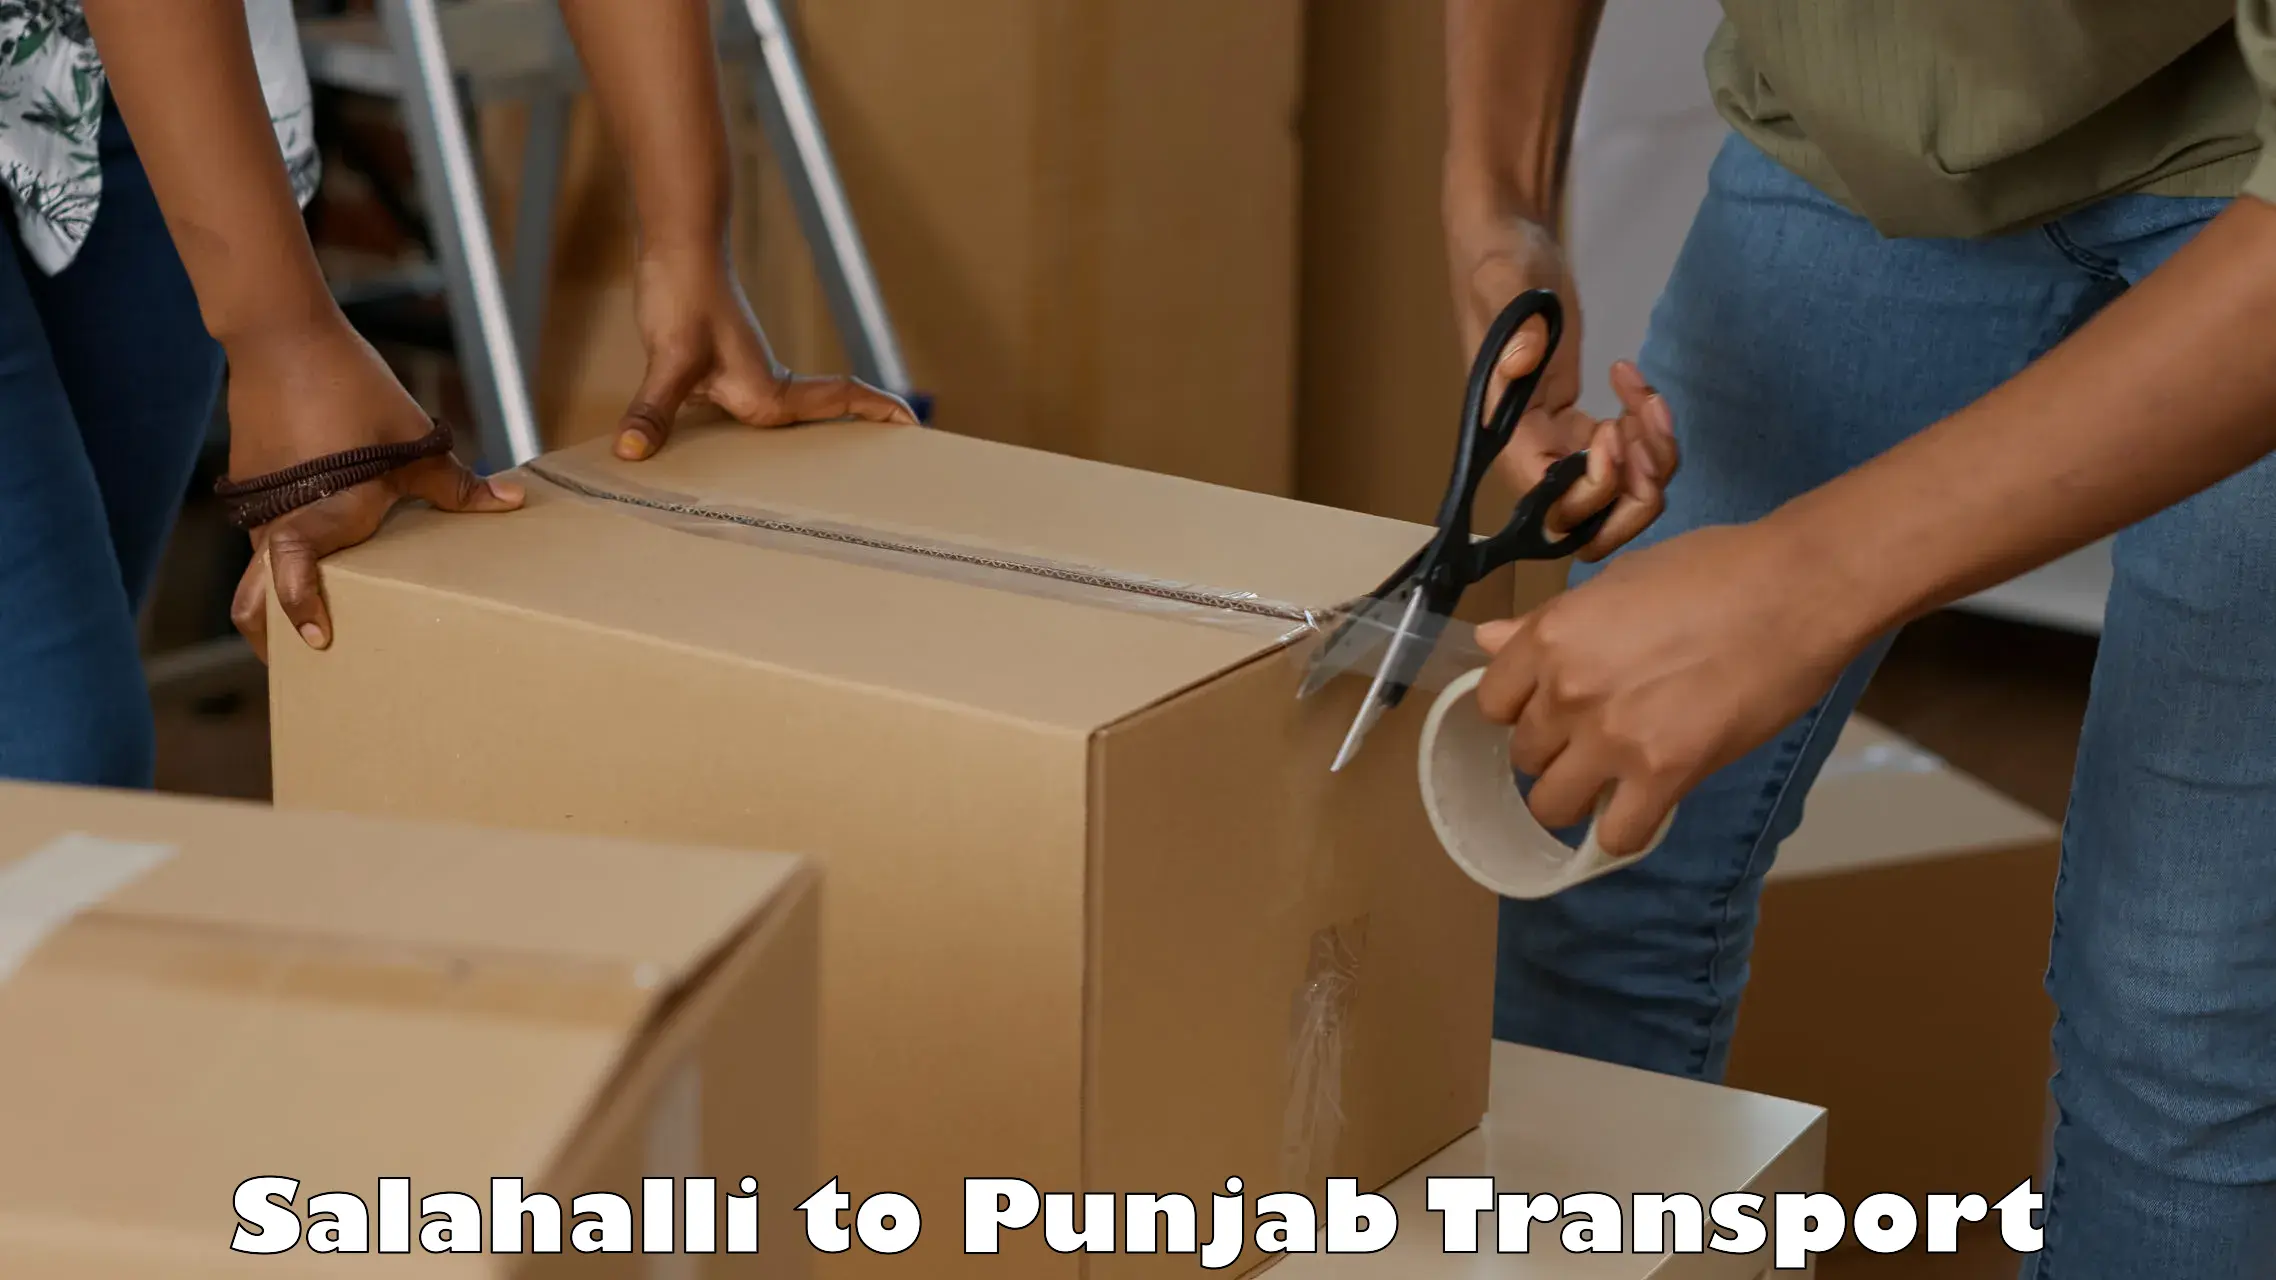 Delivery service Salahalli to Sultanpur Lodhi